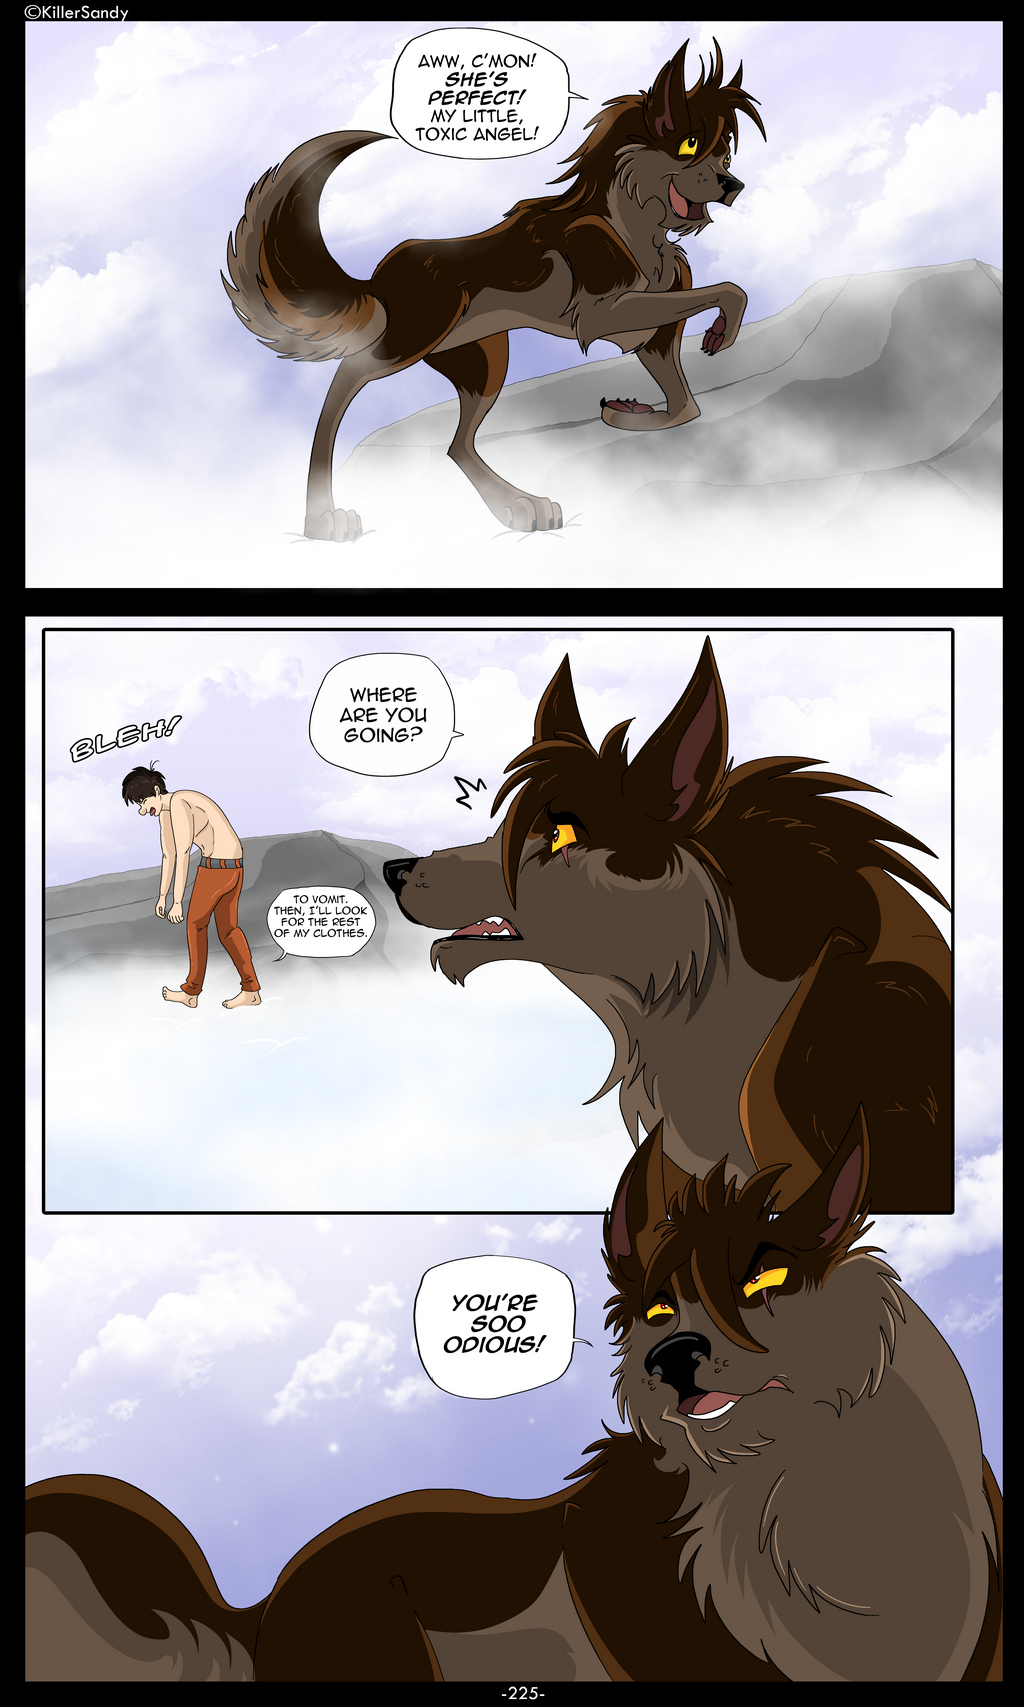 The Prince of the Moonlight Stone page 225